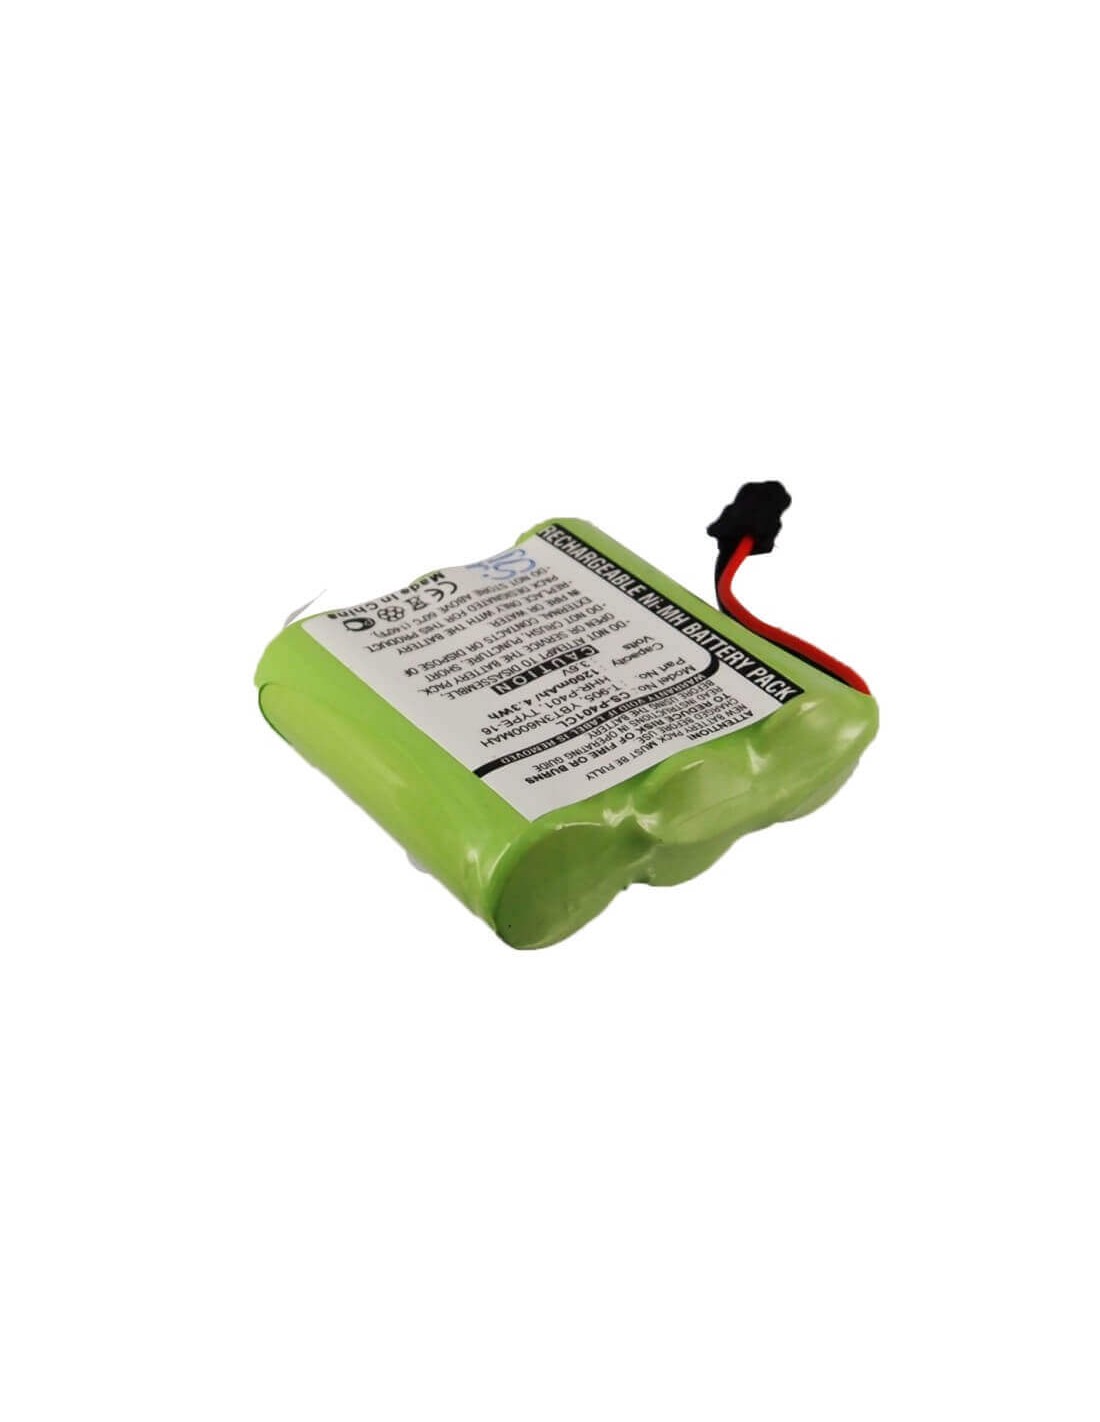 Battery for Bell South, Mph6928, Mph6929, Mph6935, 3.6V, 1200mAh - 4.32Wh